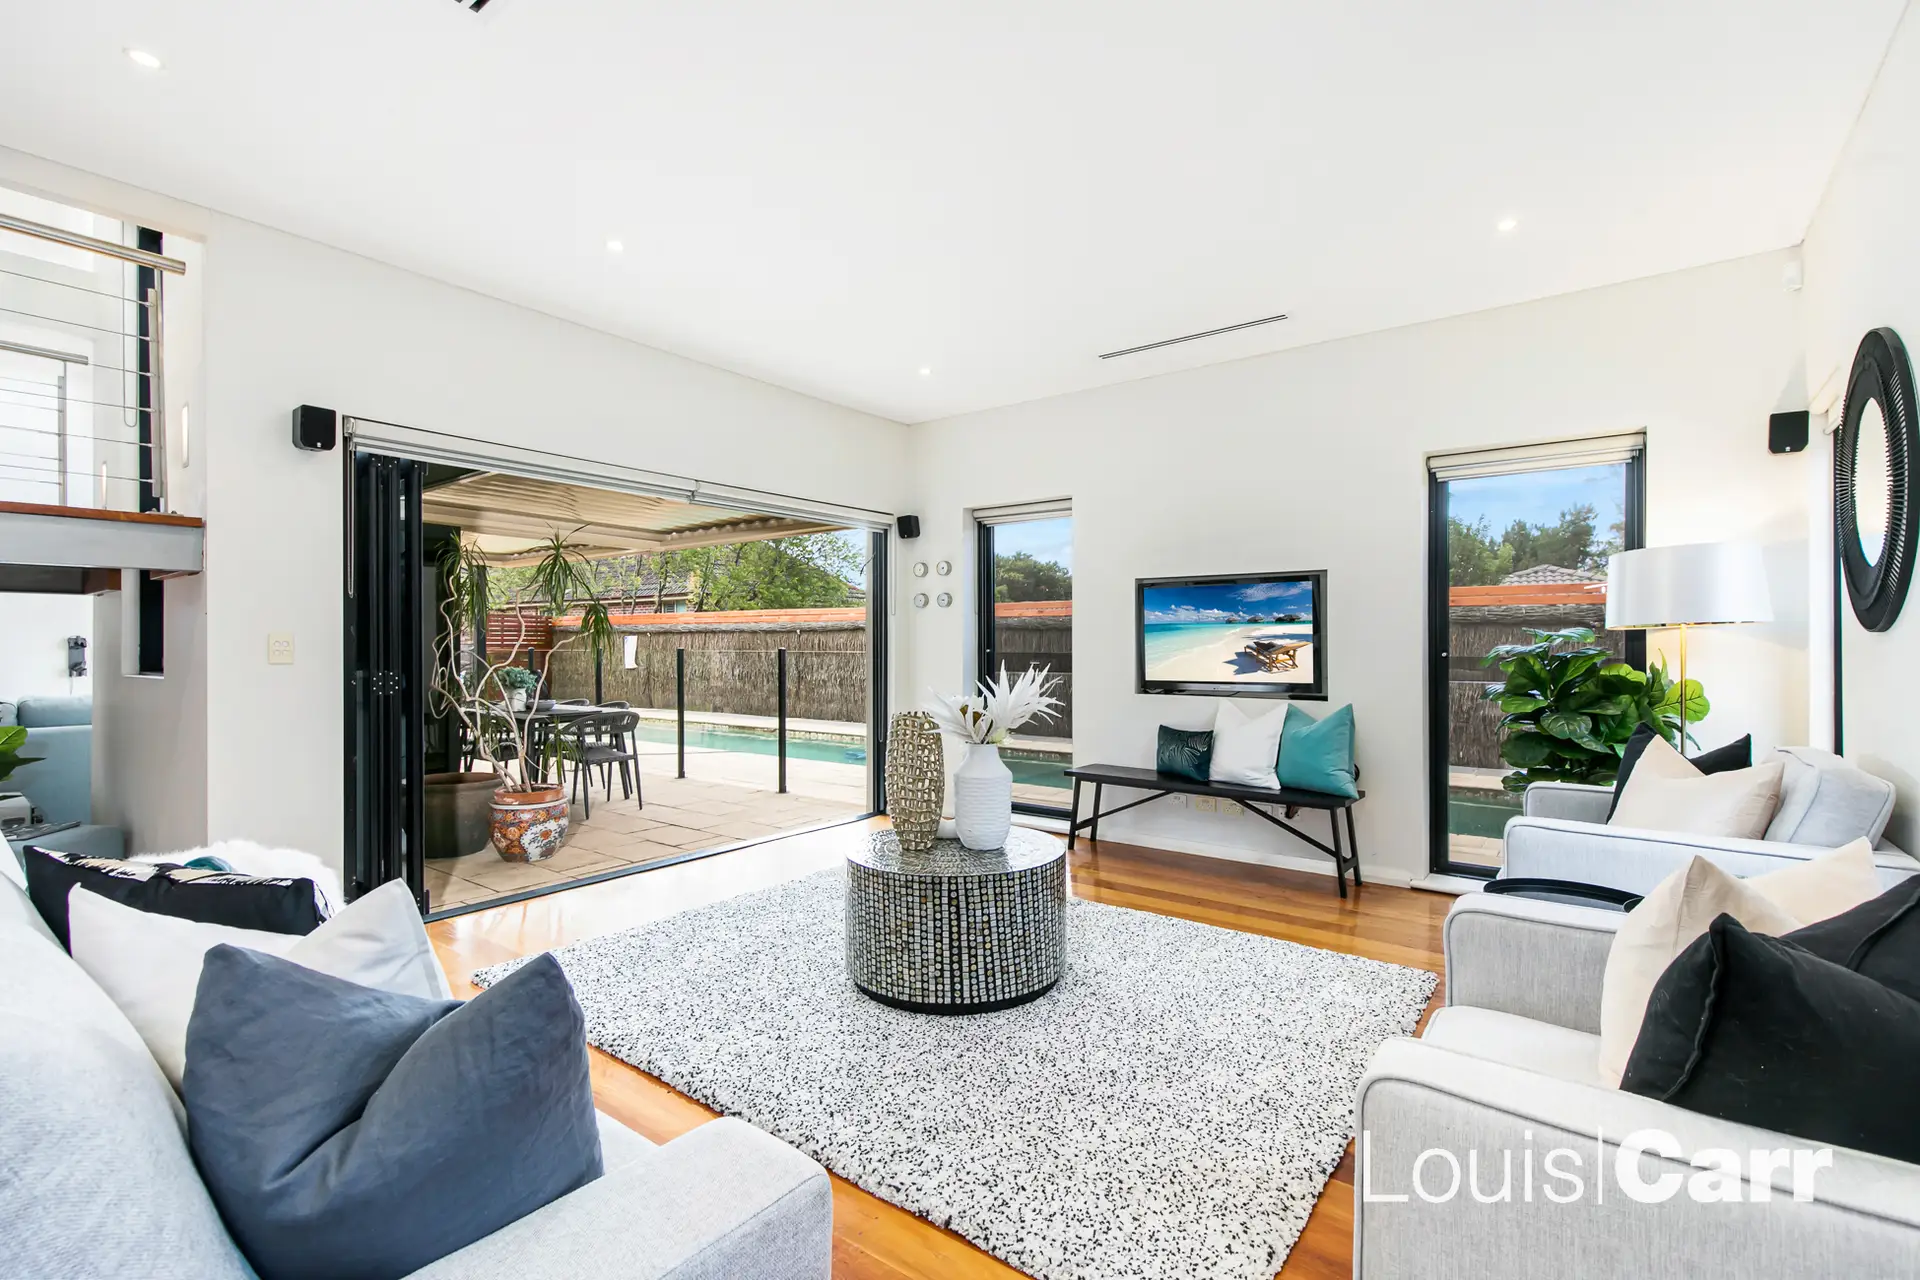 11a Robert Road, Cherrybrook Sold by Louis Carr Real Estate - image 1